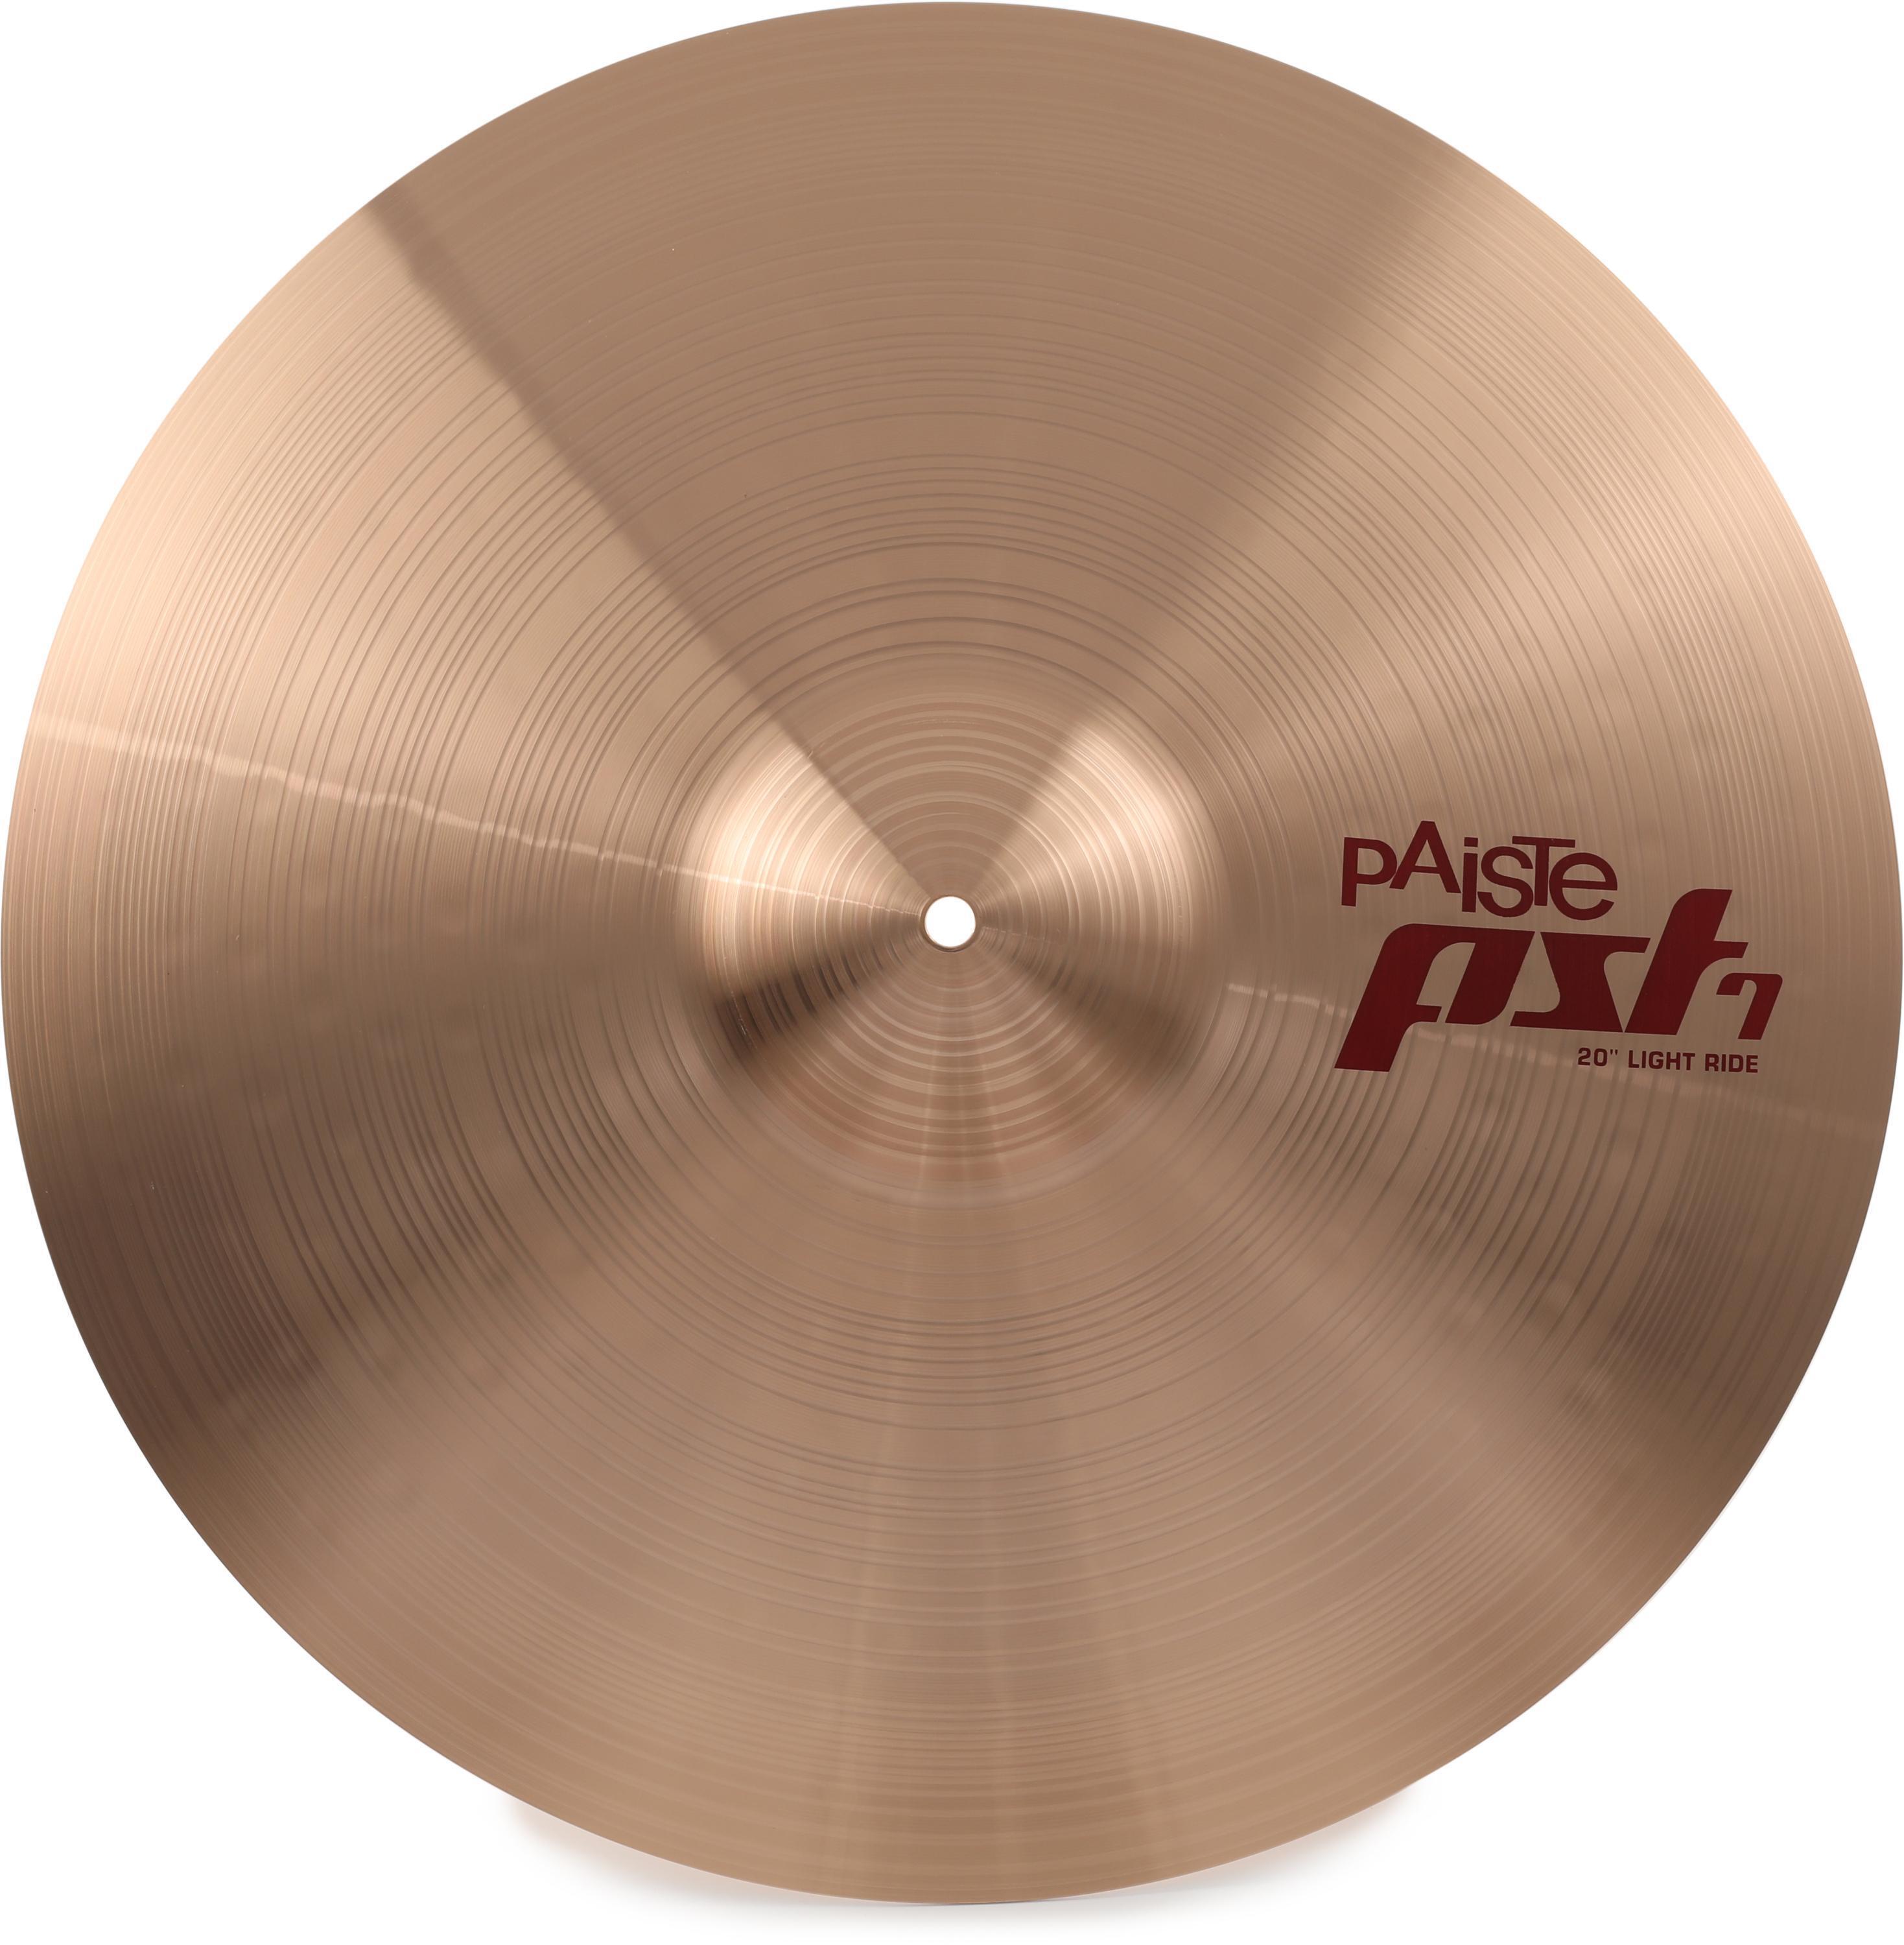 Paiste 20 inch PST 7 Light Ride Cymbal | Sweetwater